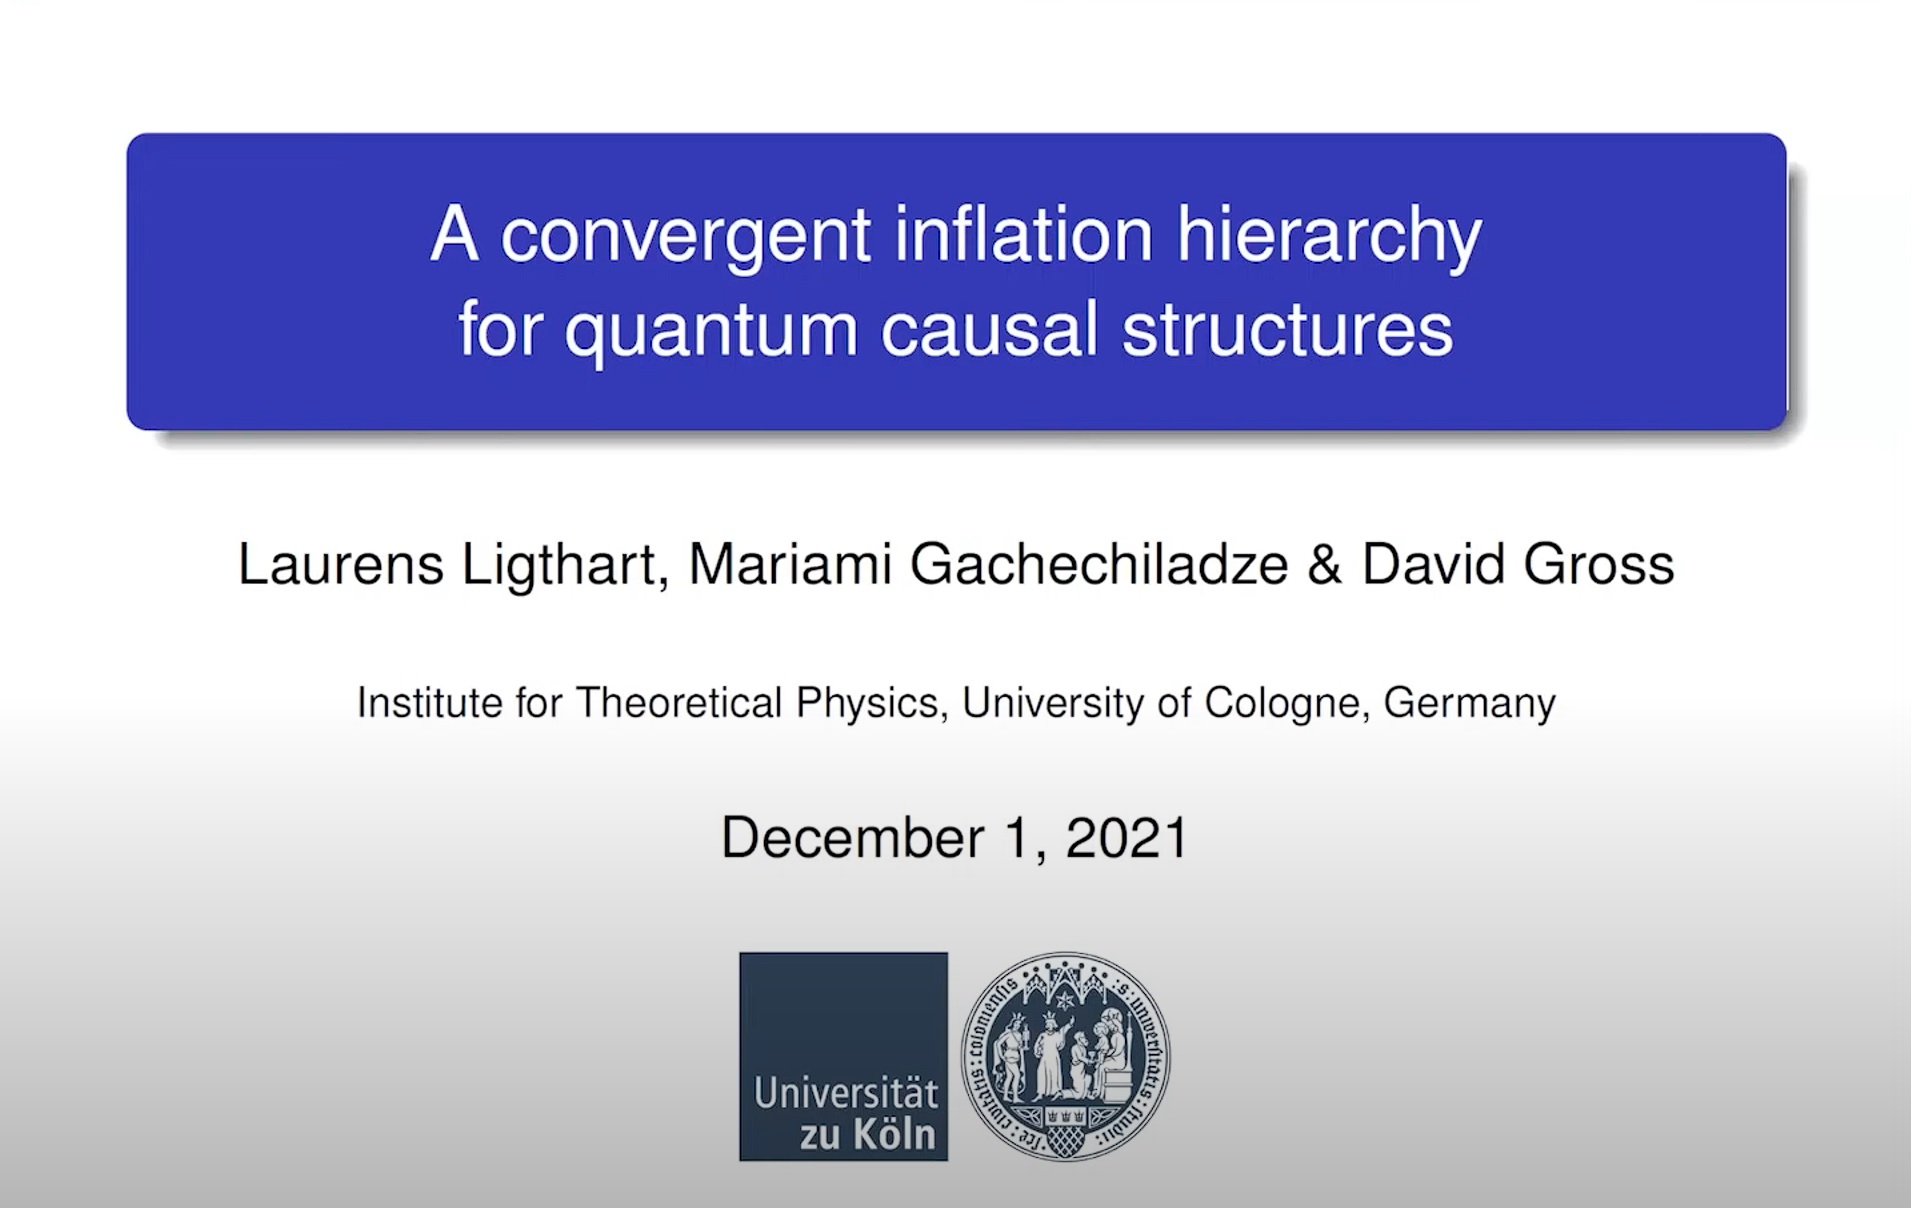 Laurens Ligthart (University of Cologne): A convergent inflation hierarchy for quantum causal structures